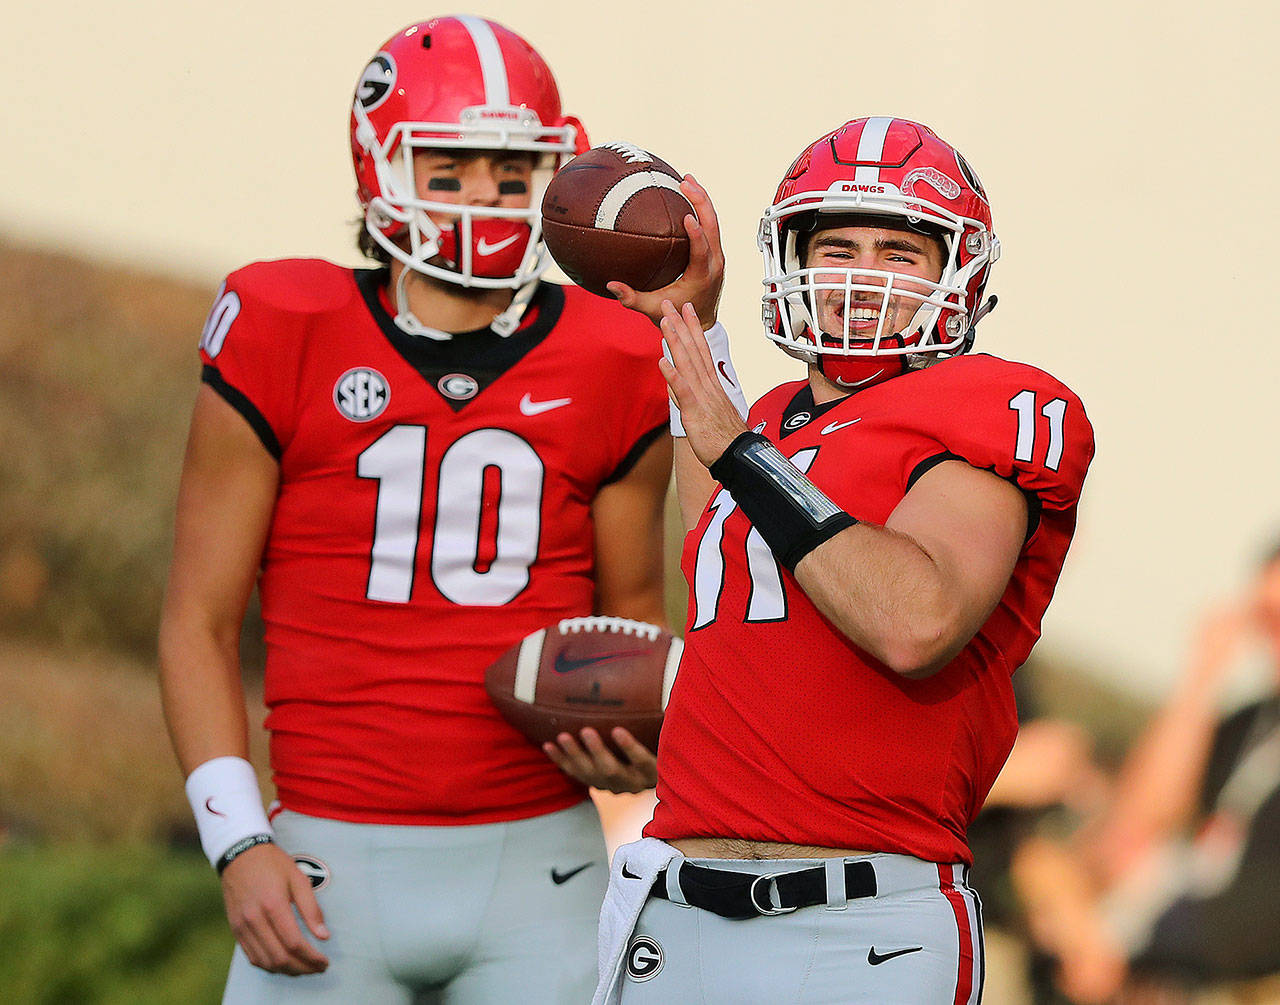 Injured Georgia quarterback Jacob Eason watches as starter Jake Fromm warms up before the team’s win over Mississippi State on Saturday in Athens, Ga. (Curtis Compton/Atlanta Journal-Constitution via AP)